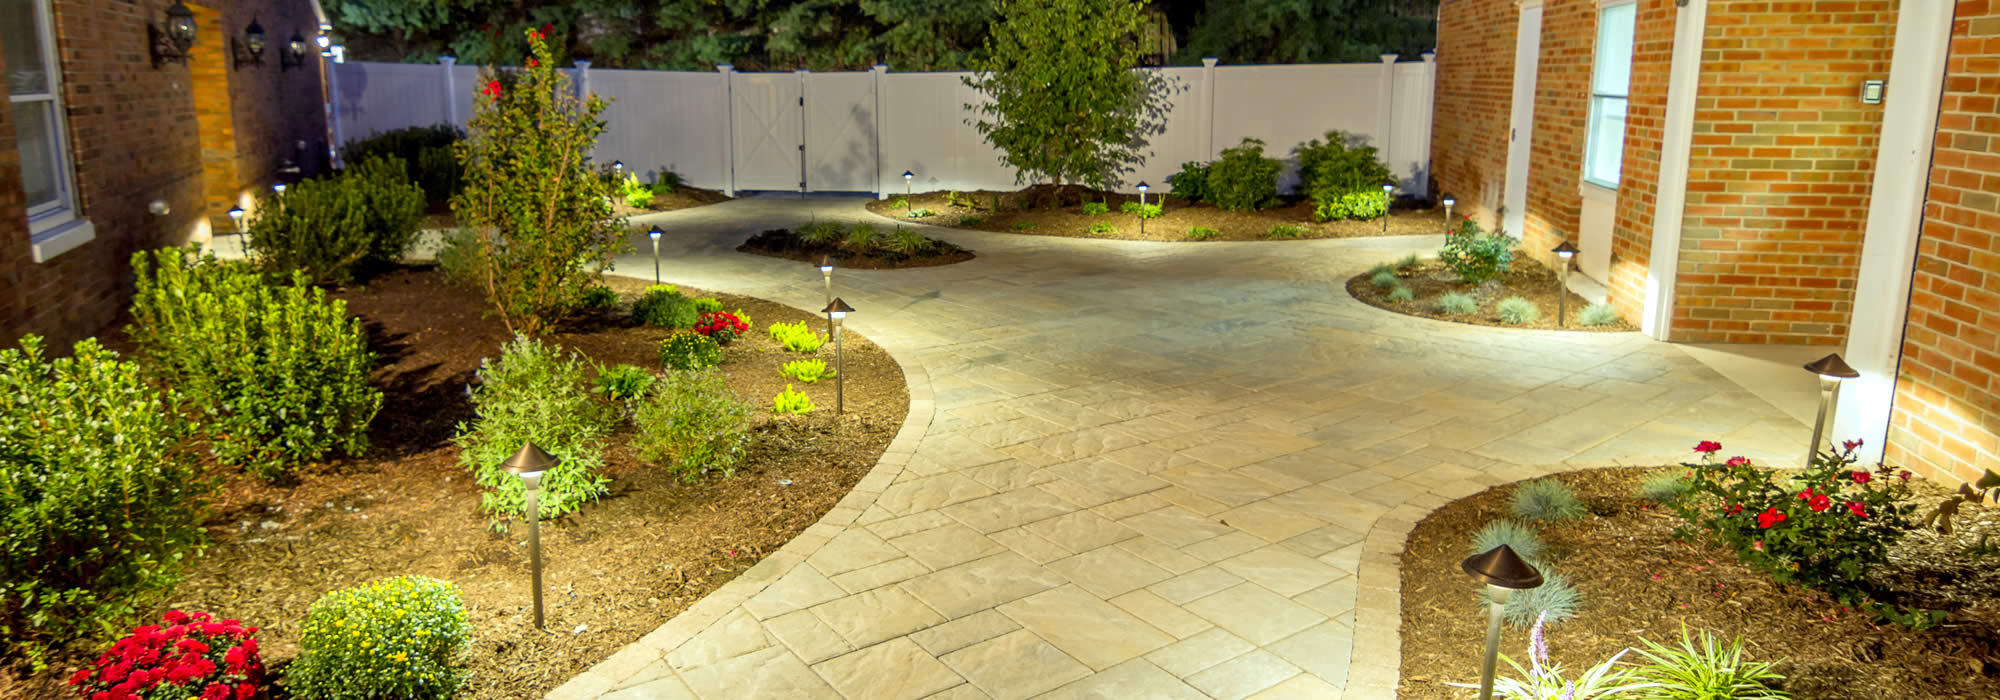 Landscaping Services in Cross Plains